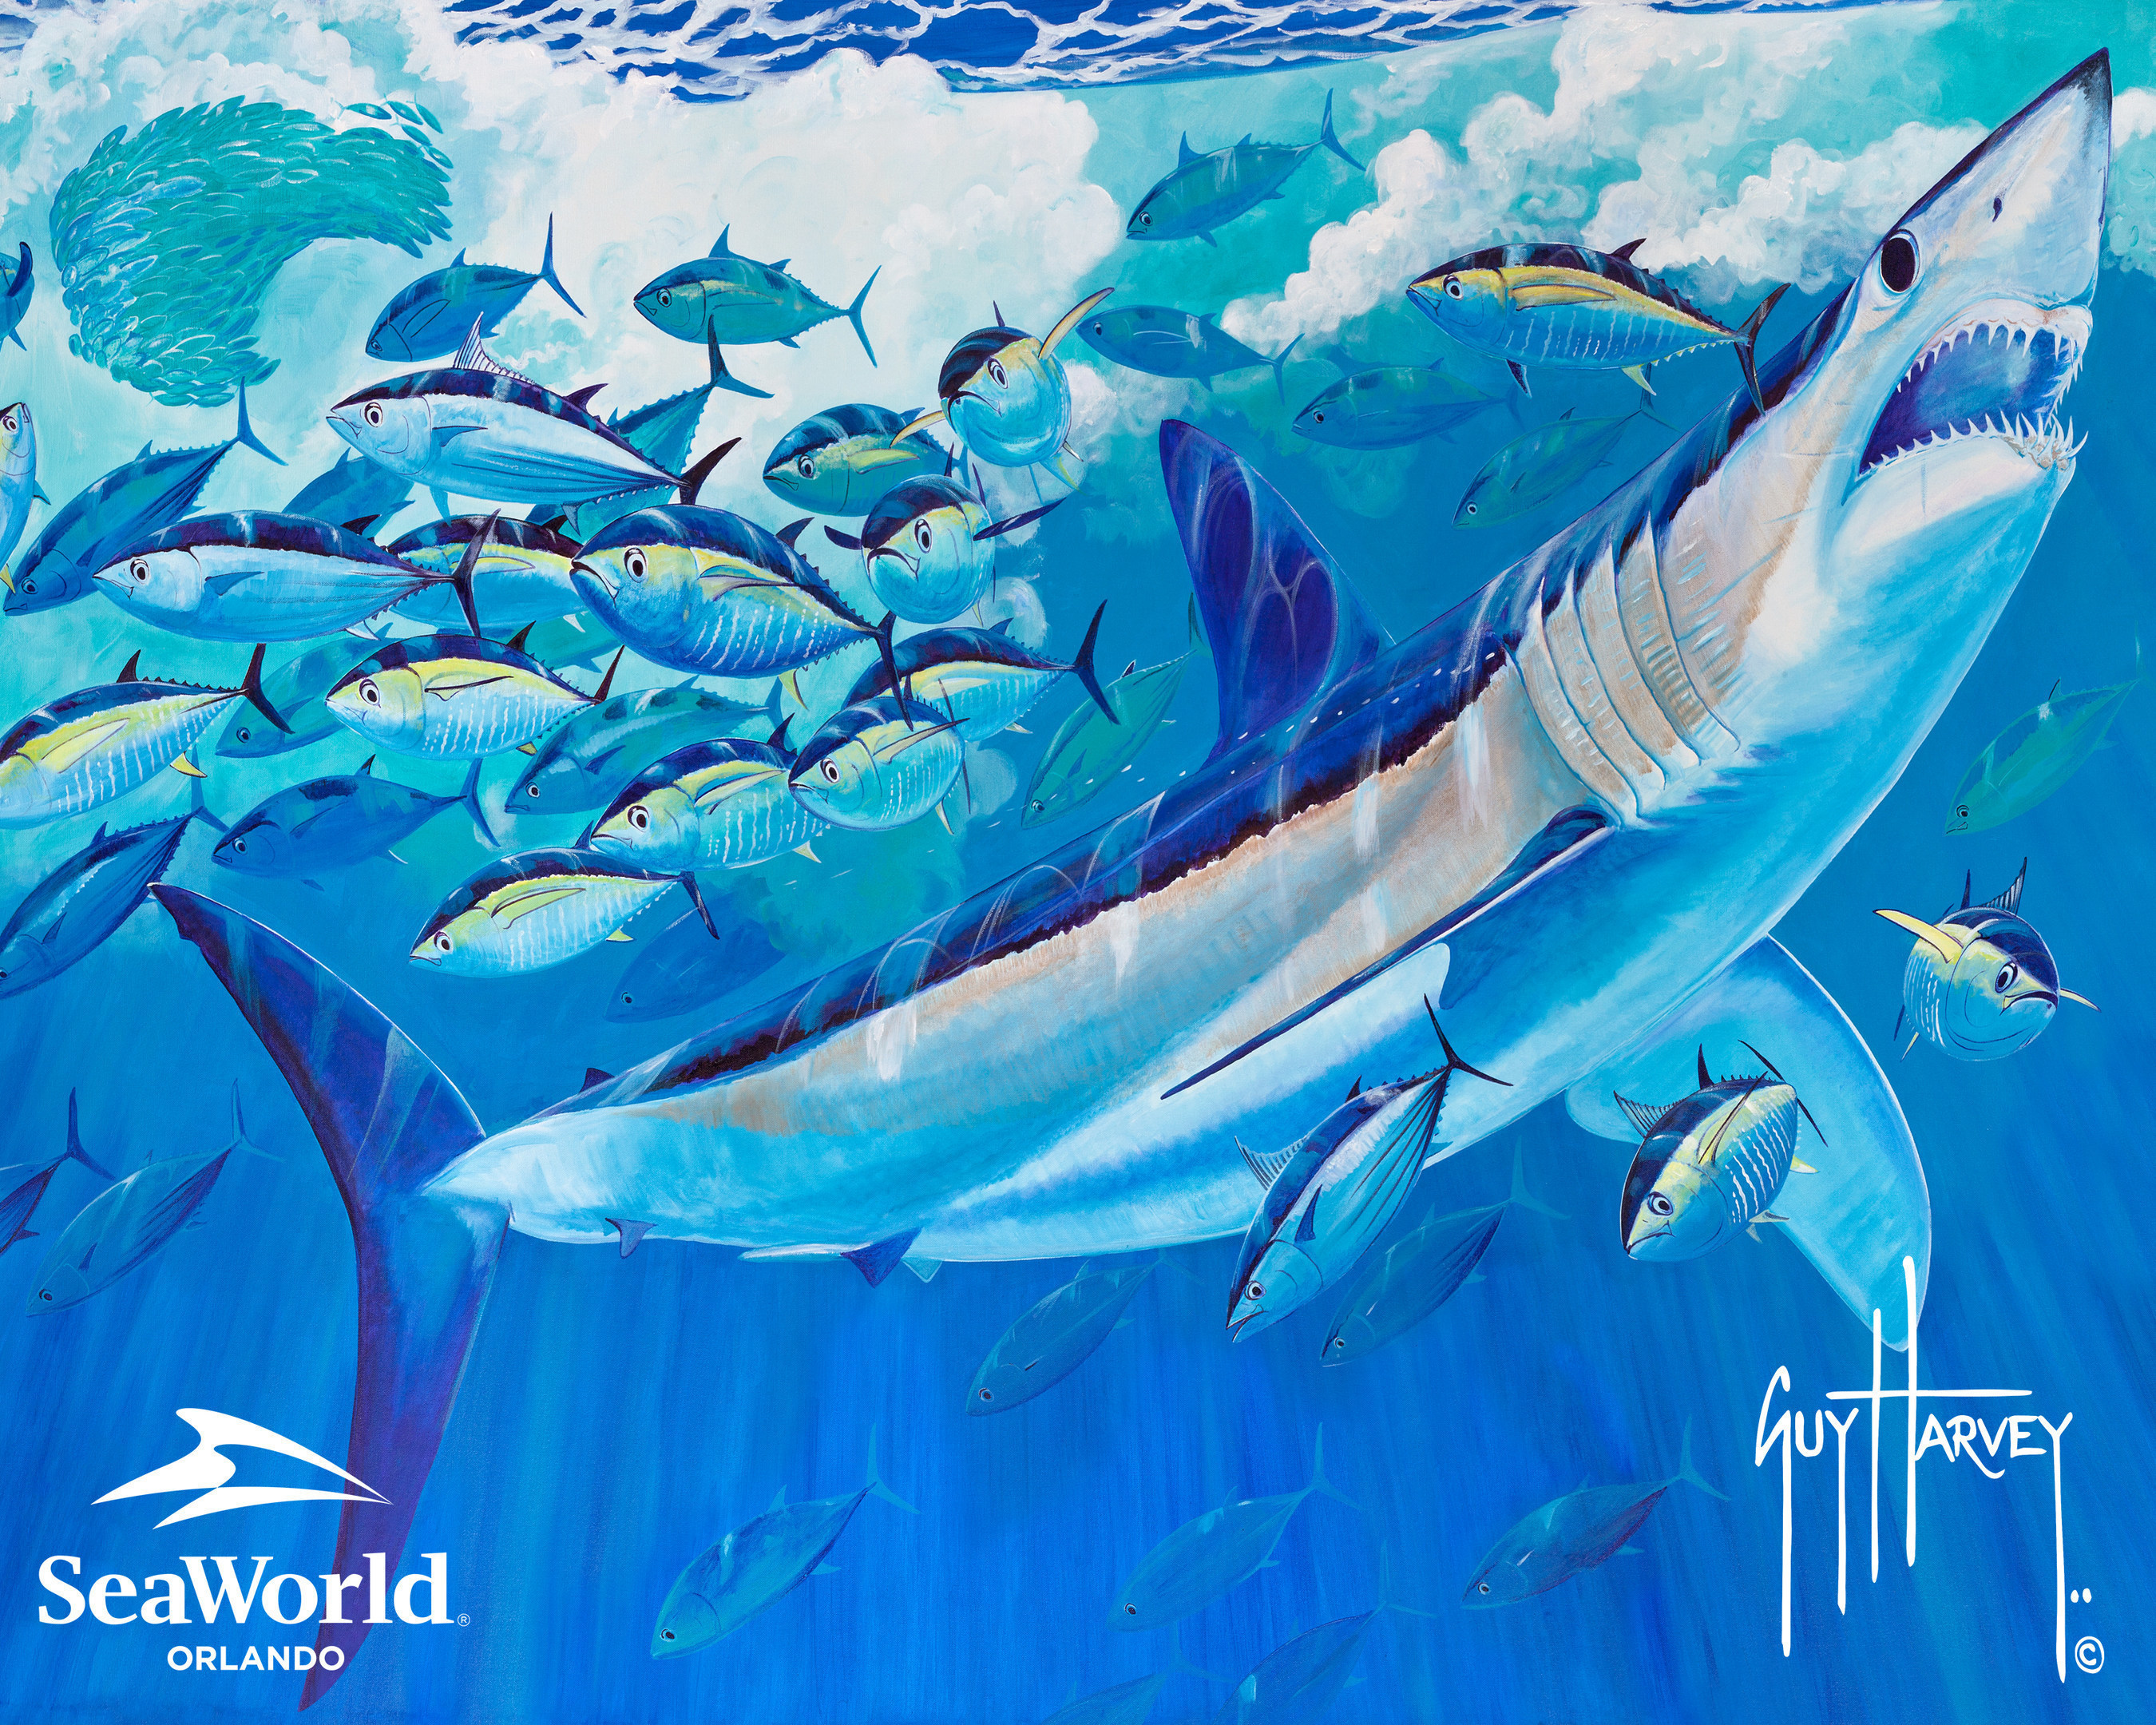 SeaWorld Parks & Entertainment (SEA) and world-renowned marine artist and conservationist Guy Harvey today announced a new partnership focused on ocean health and the plight of sharks in the wild.  The two organizations will partner to raise awareness of these important issues, and collaborate on science and research to increase understanding of how to better protect these critical predators and their habitats.